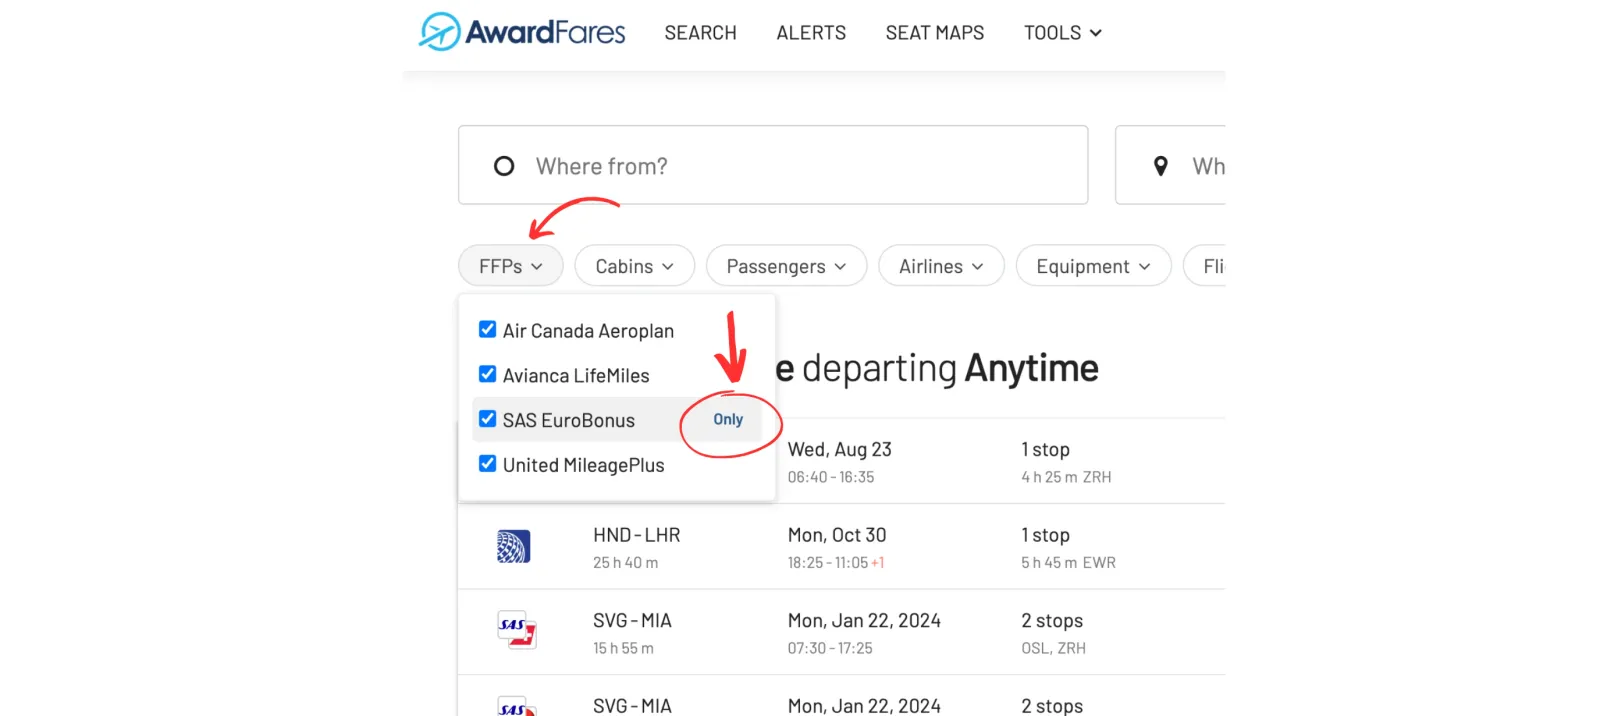 AwardFares filter by frequent flyer program.